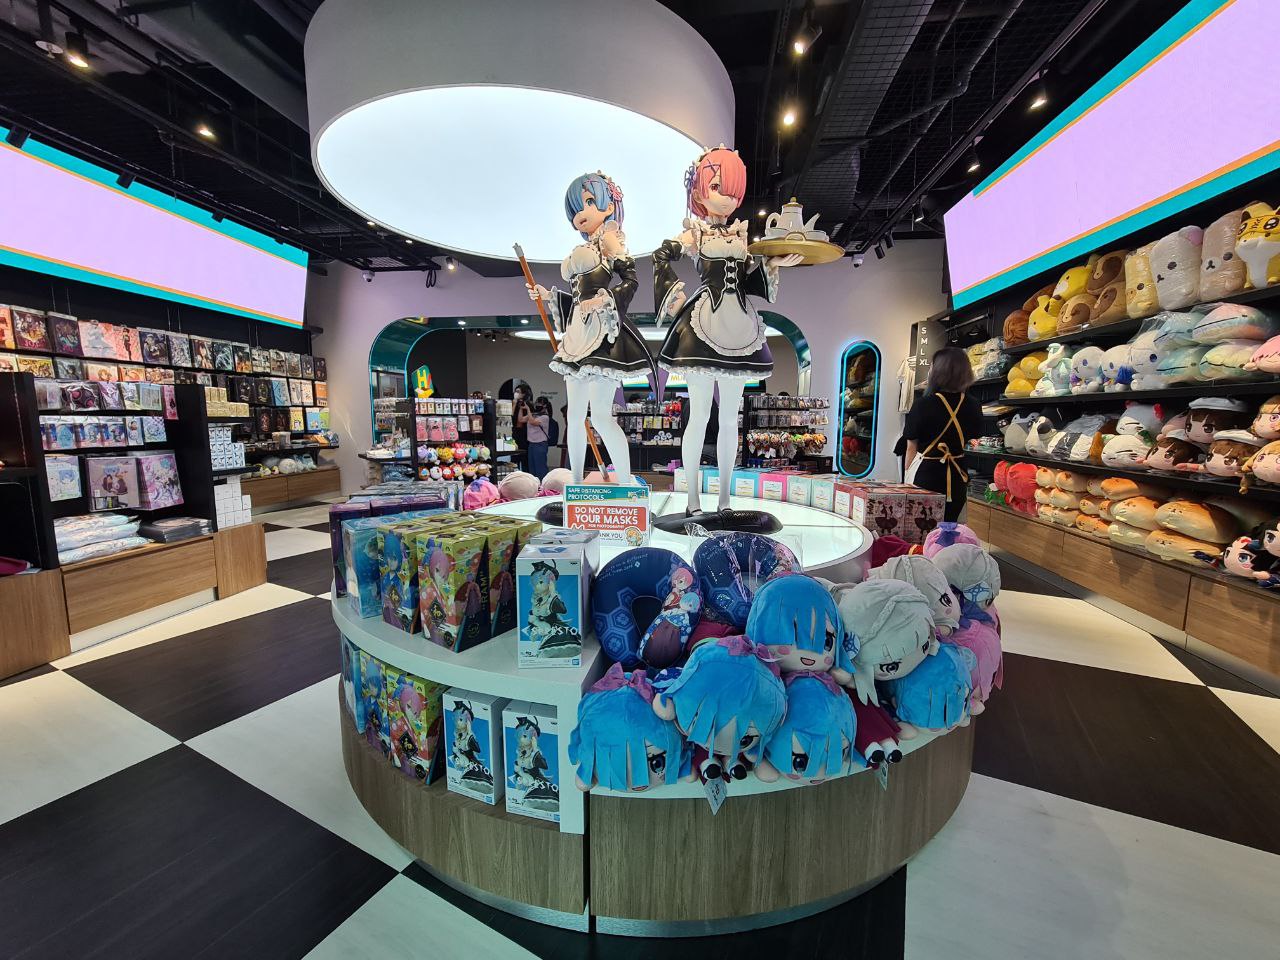 Singapore gets its first anime retail store that features